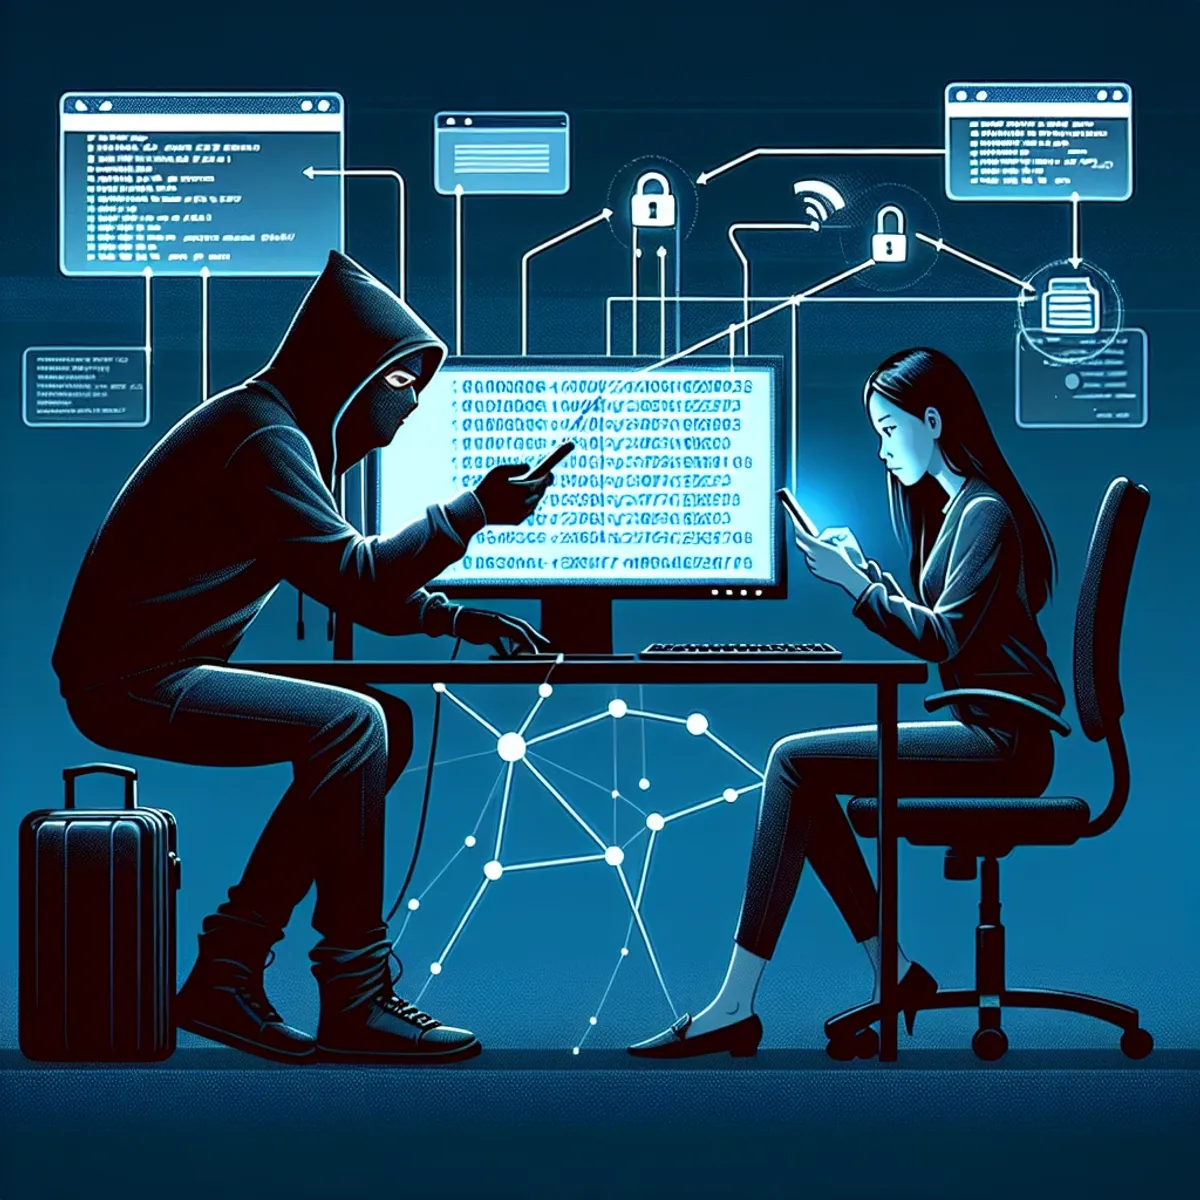 Two individuals, one as an unsuspecting phone user and the other as a hacker. The hacker, a Black man, wearing a hoodie and seated behind a computer with a screen showing codes is attempting to infiltrate the mobile device held by the phone user, an Asian woman. The visual representation of hacking could be illustrated by dotted lines or signals tracing from the hacker's computer to the mobile device. Replace any idea of textual codes with abstract symbols and patterns.